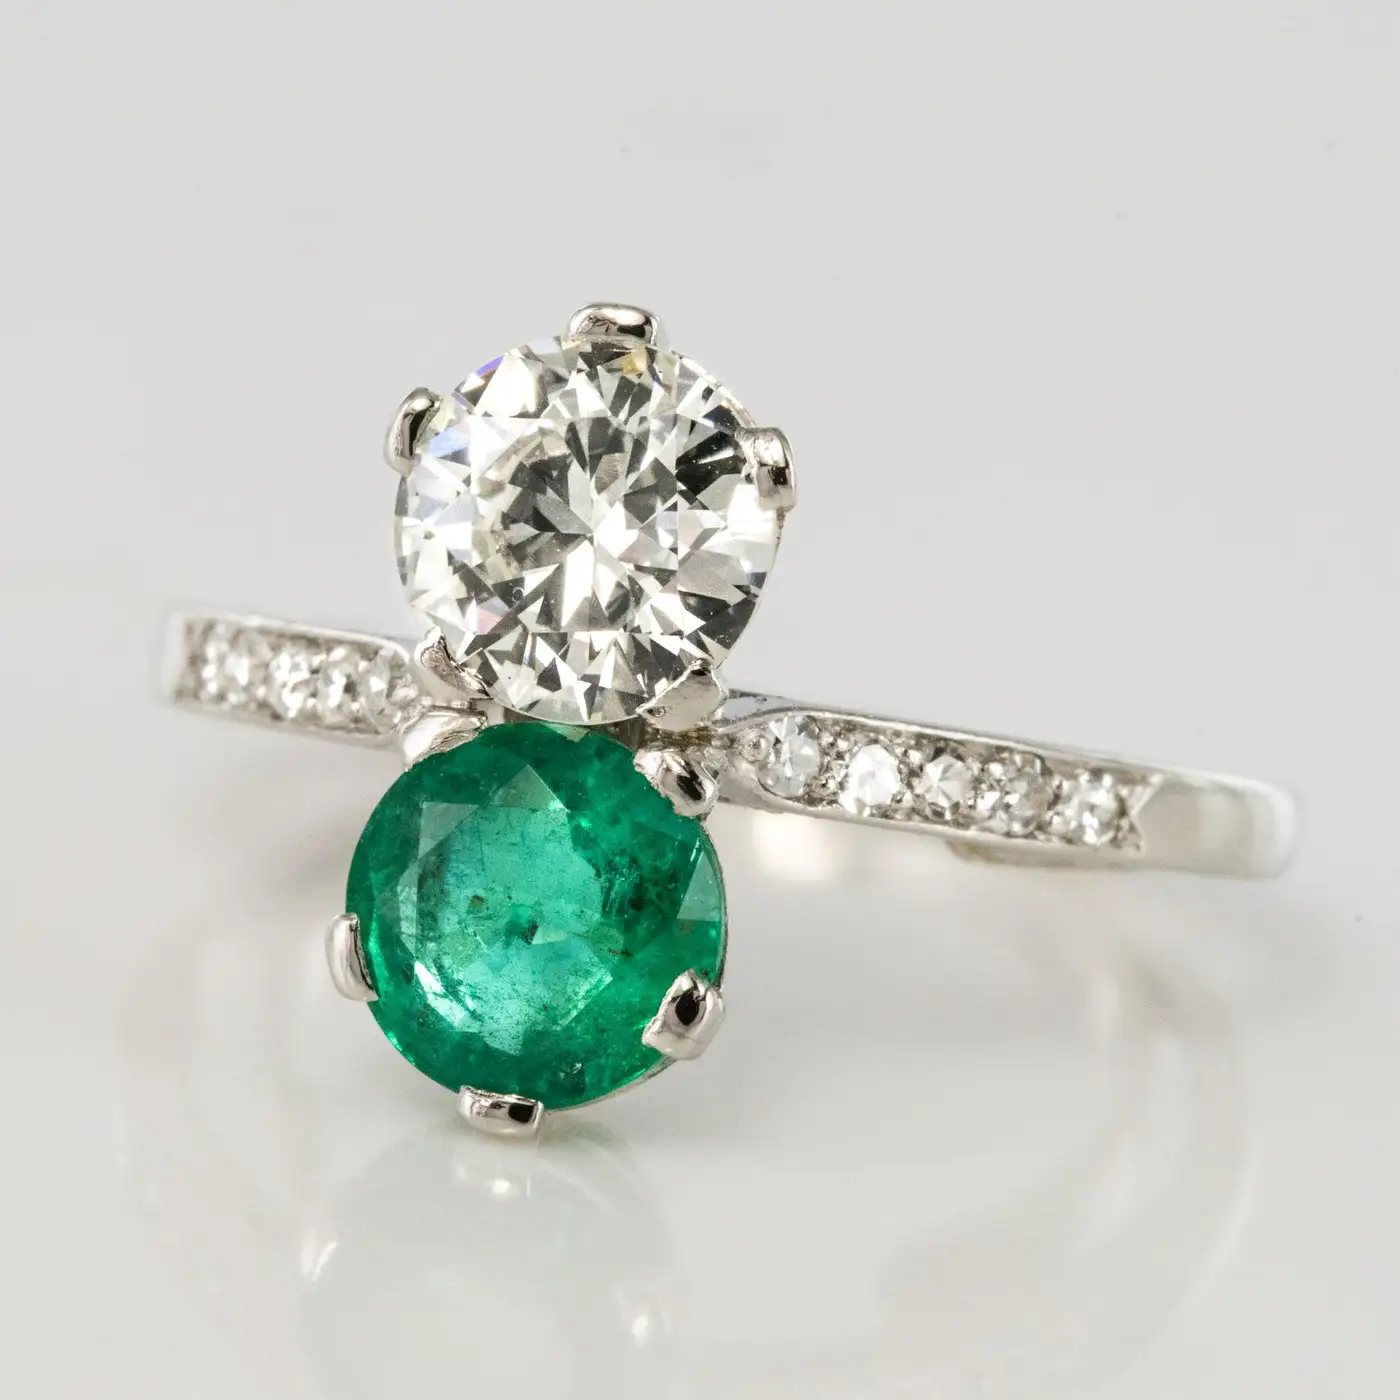 1930s-French-Platinum-Art-Deco-Emerald-Diamond-You-and-Me-Ring-2.webp